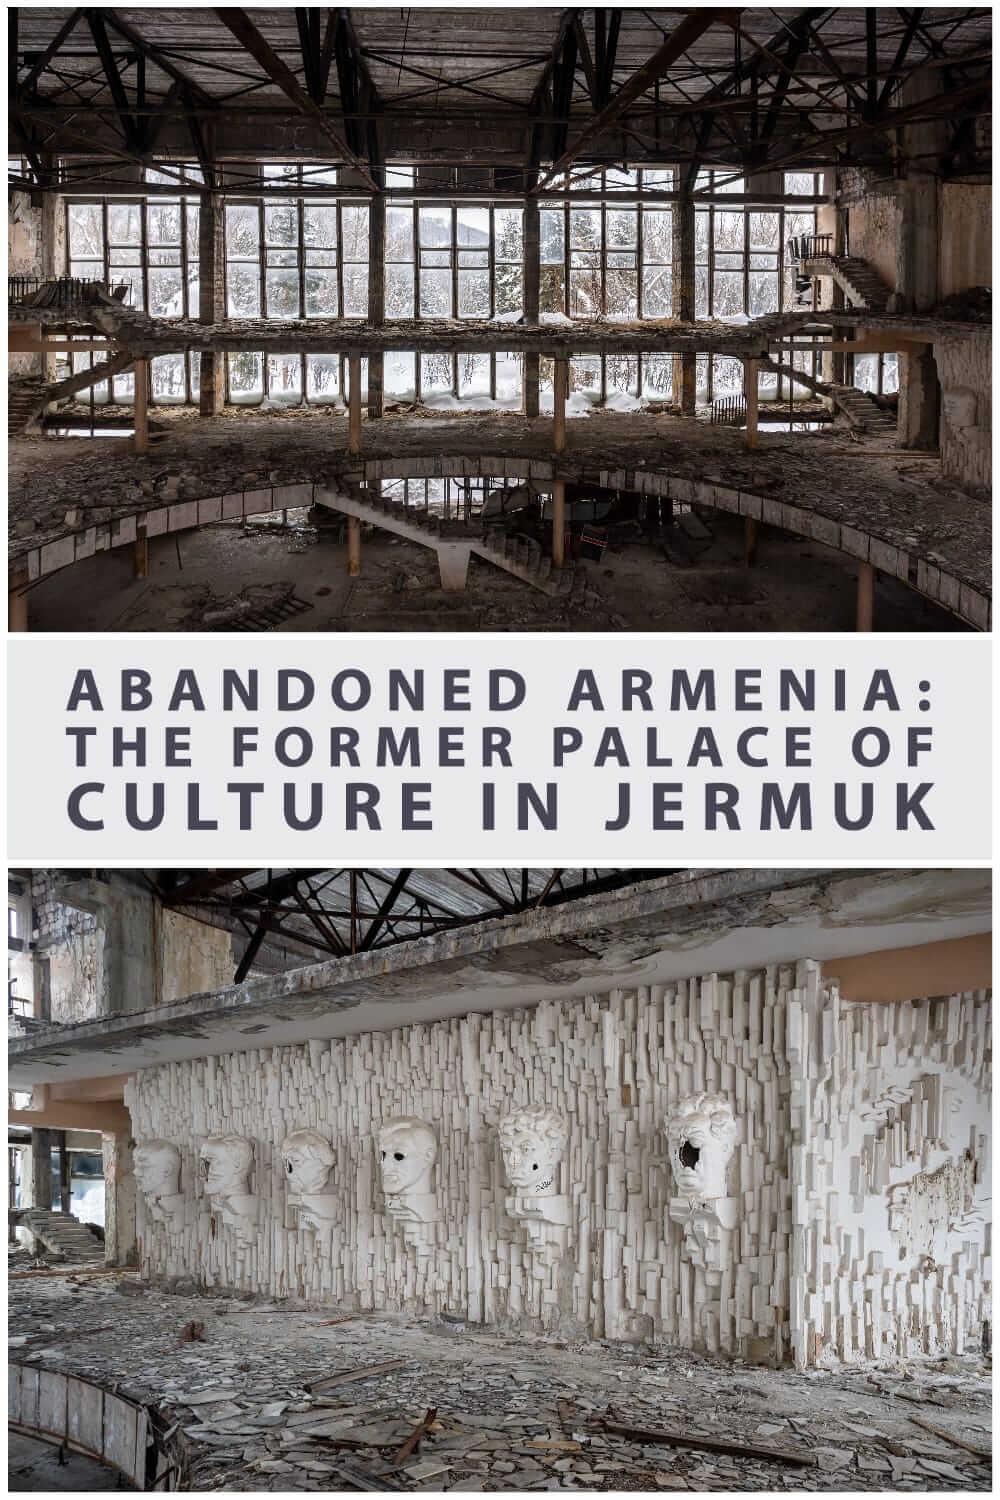 Abandoned Armenia - The former Palace of Culture in Jermuk